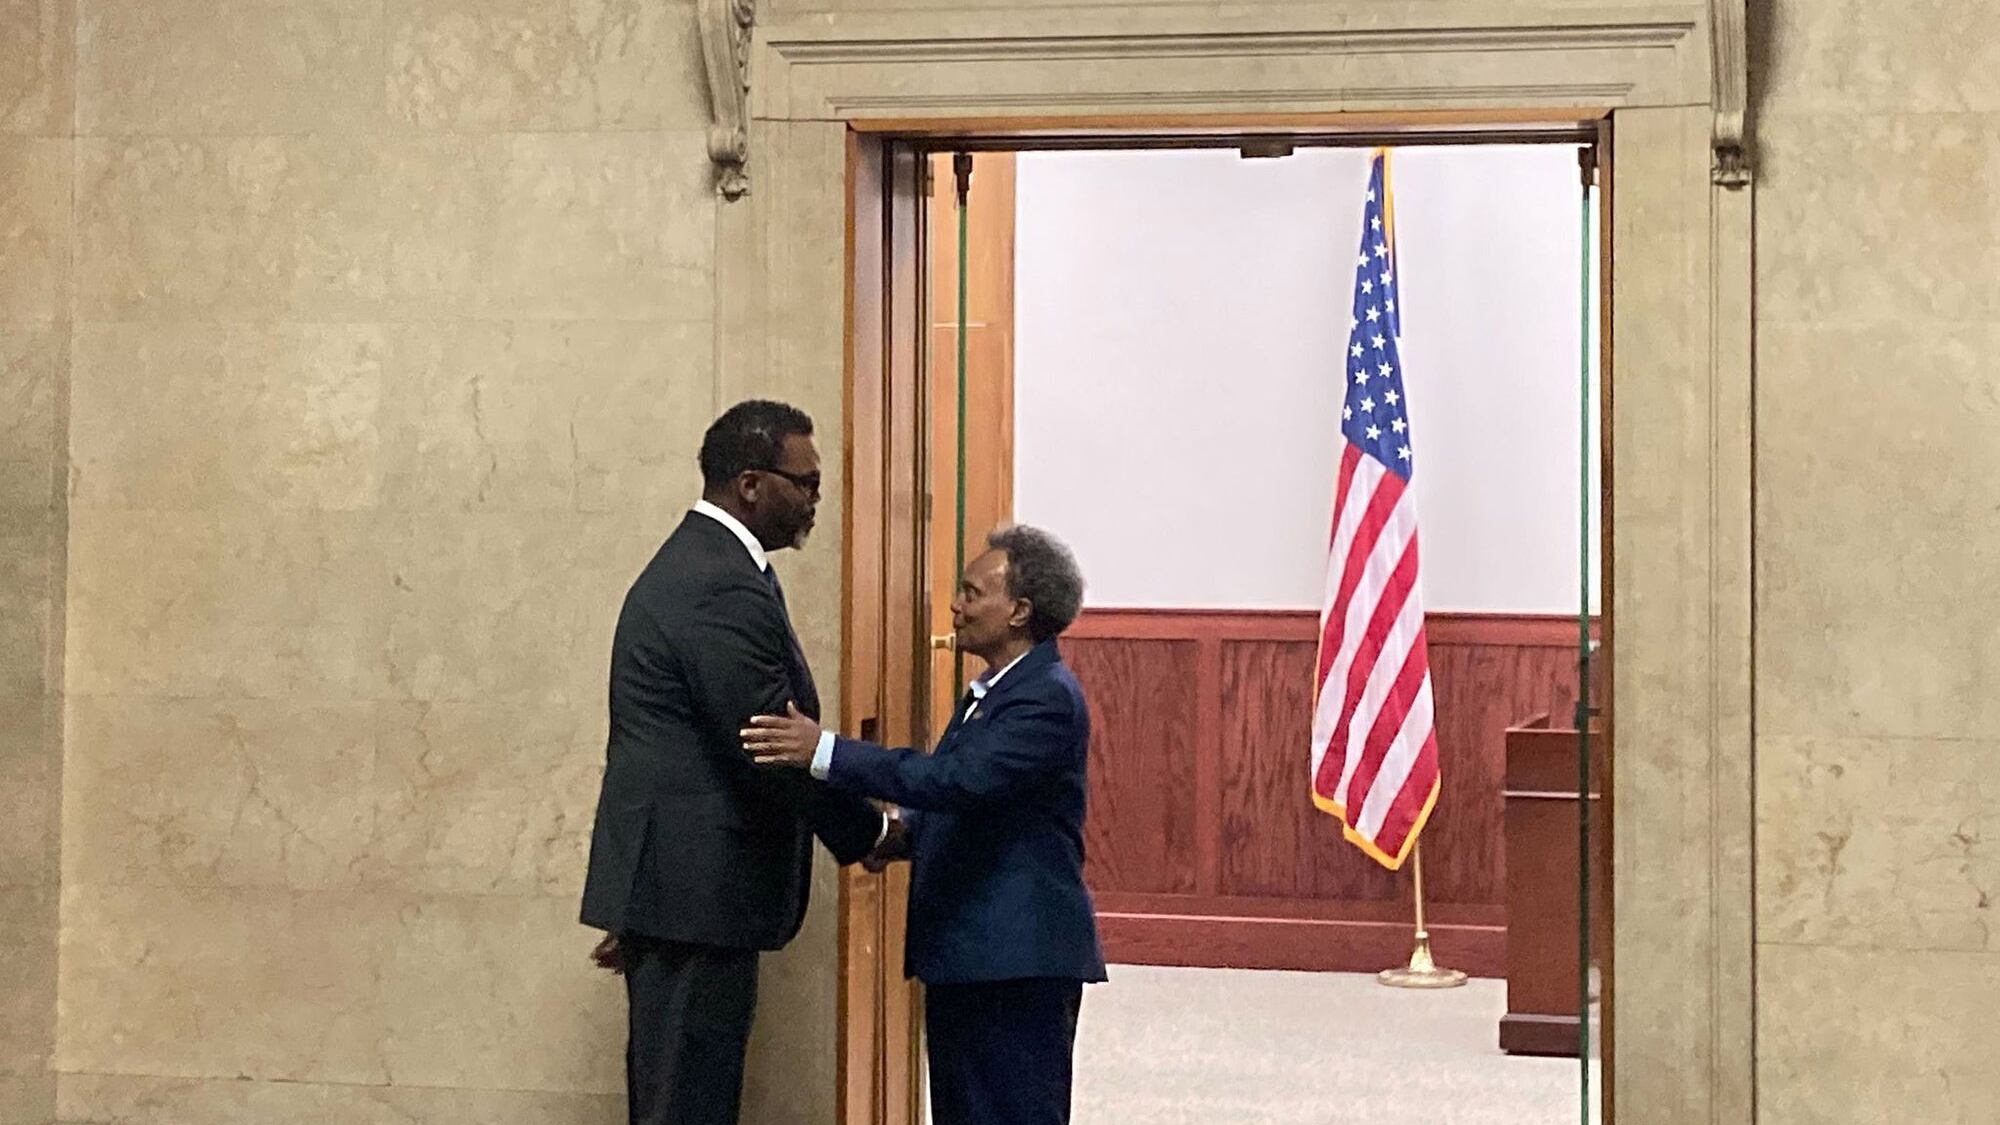 Chicago Mayor-elect Brandon Johnson shakes hands with current Mayor Lori Lightfoot. They are both wearing dark suits and standing in front of a doorway. A U.S. flag is in the background.